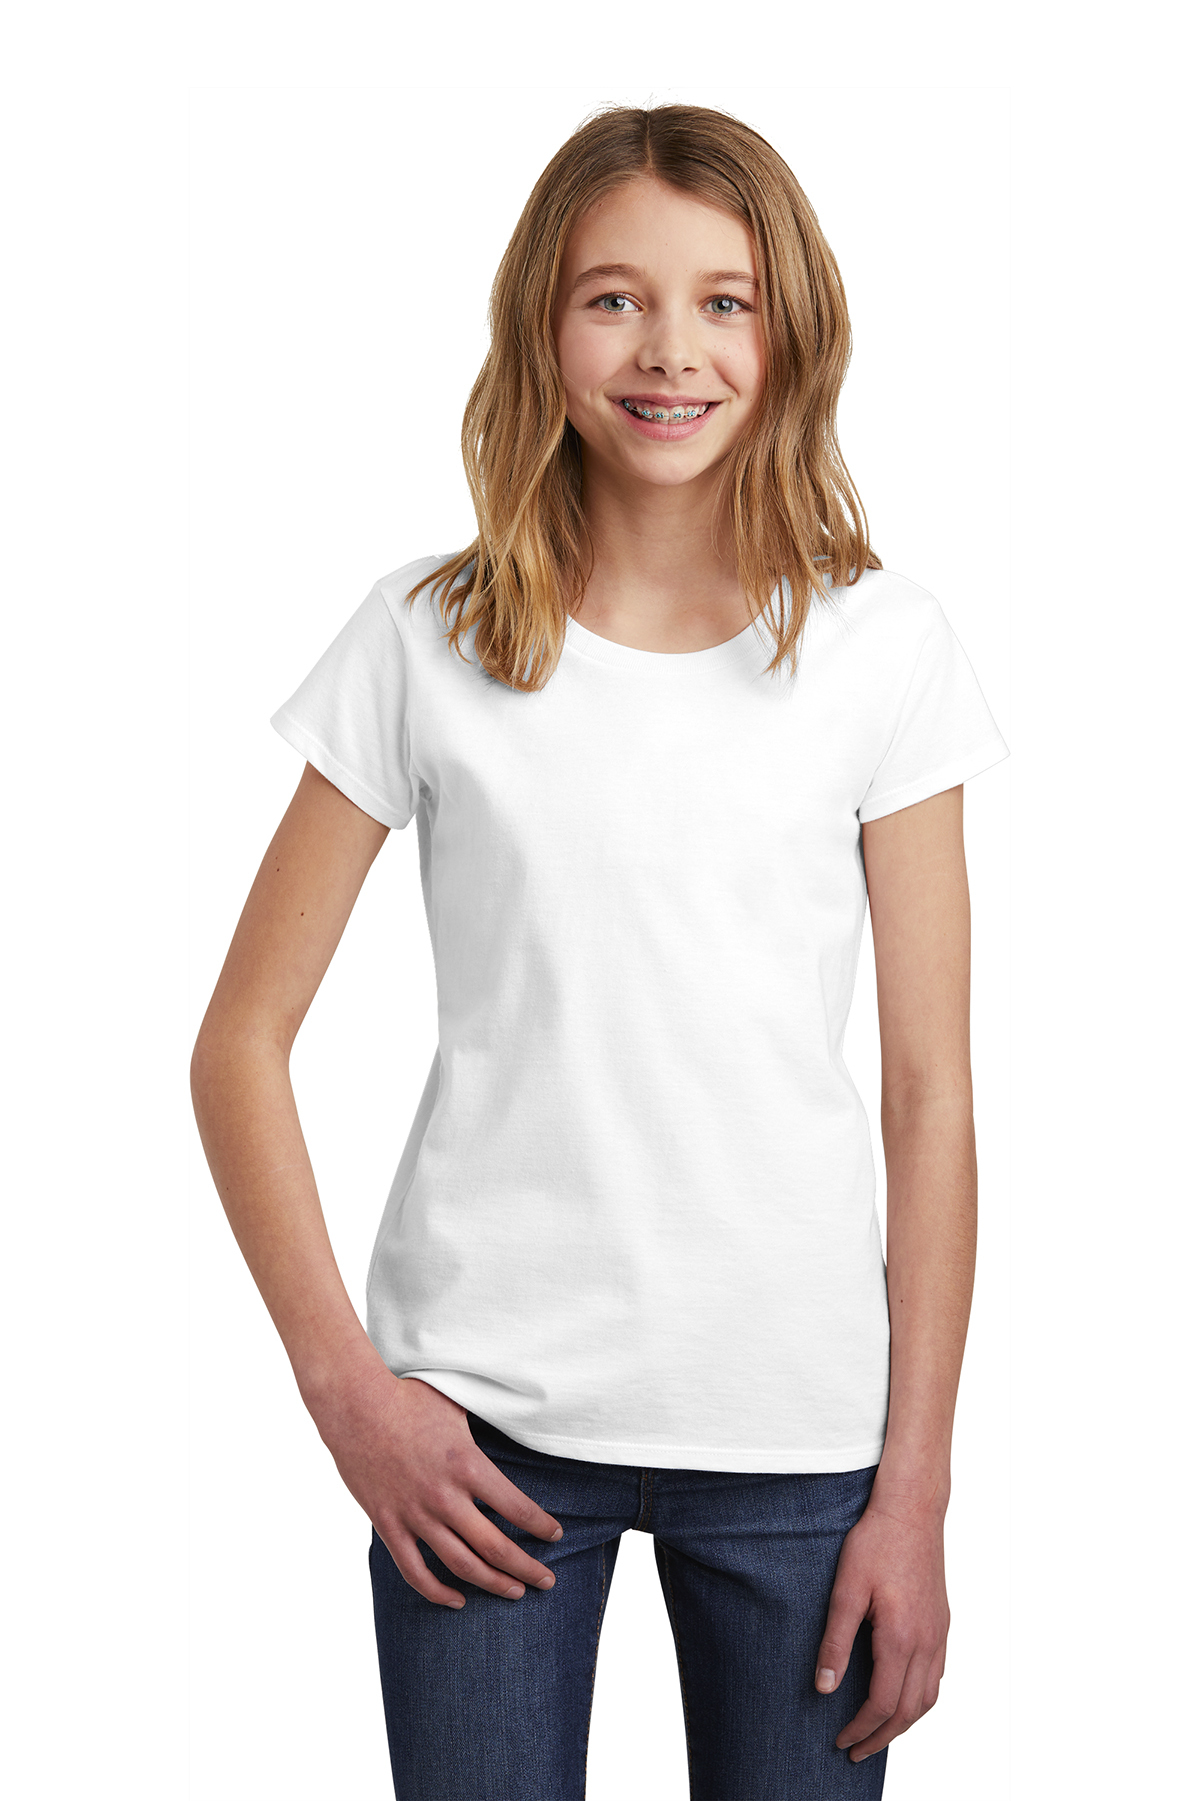 District DT6001YG - Girls Very Important Tee